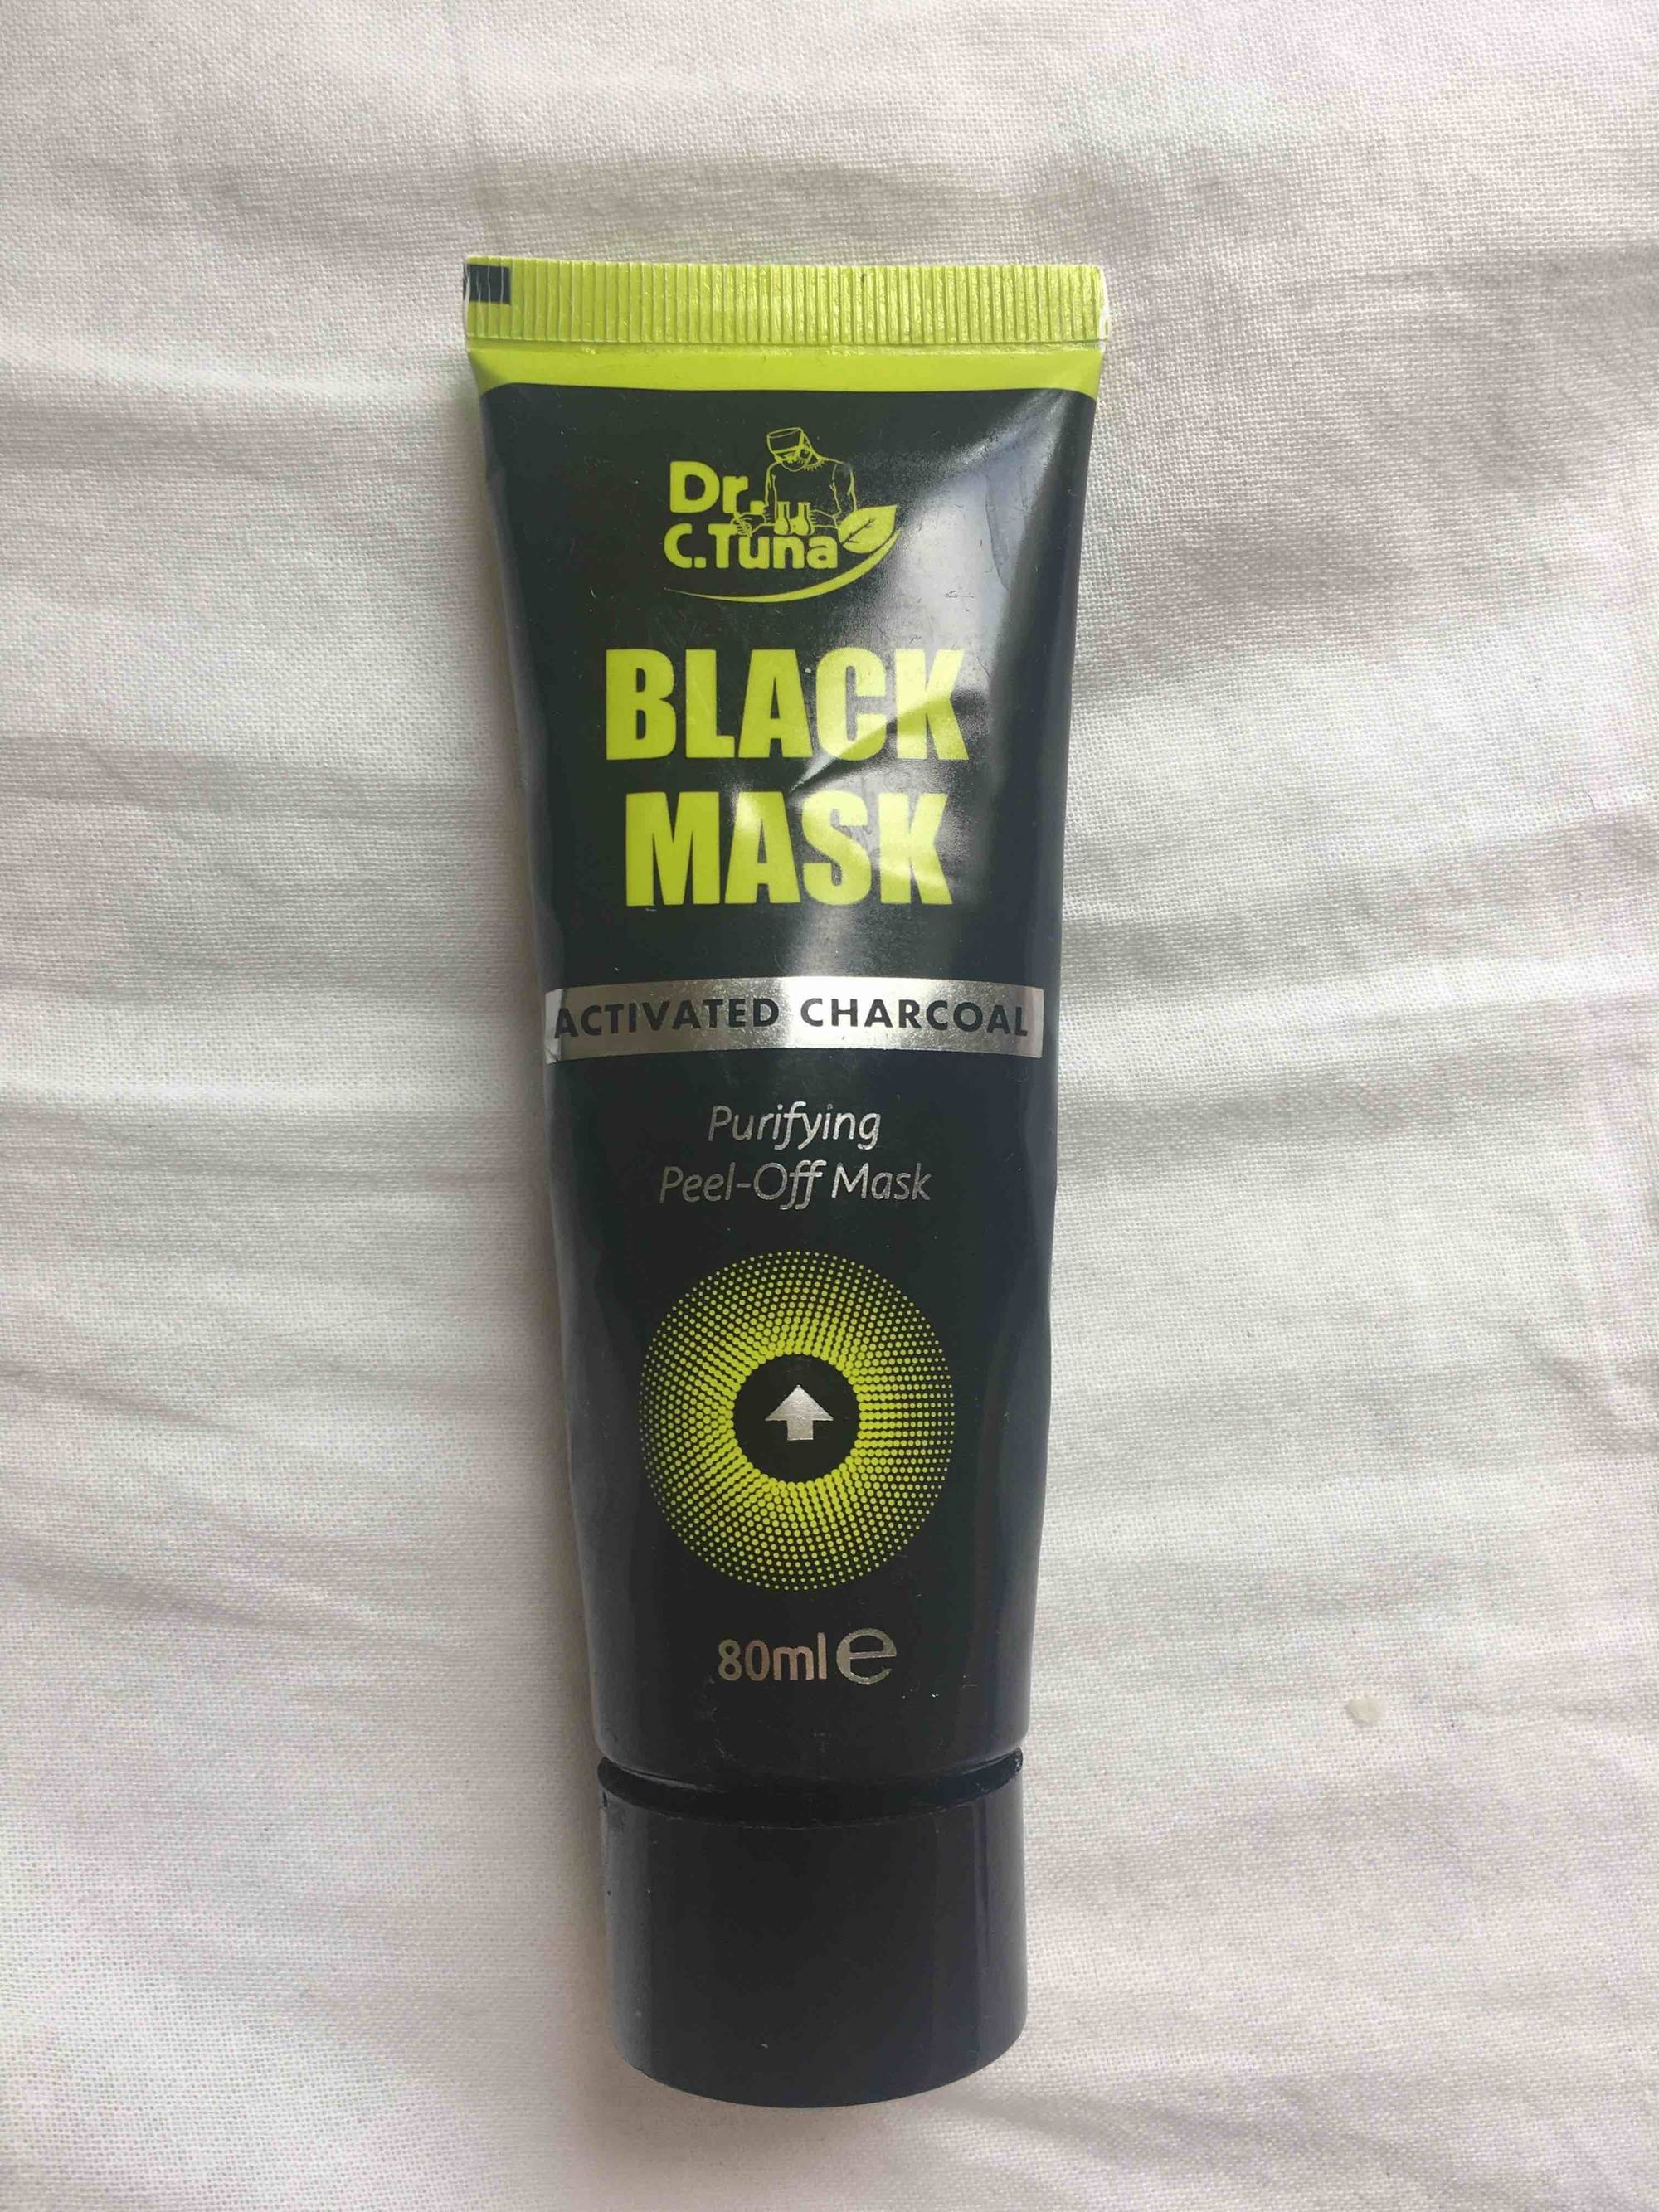 DR. C. TUNA - Black mask - Activated charcoal - Purifying peel-off mask